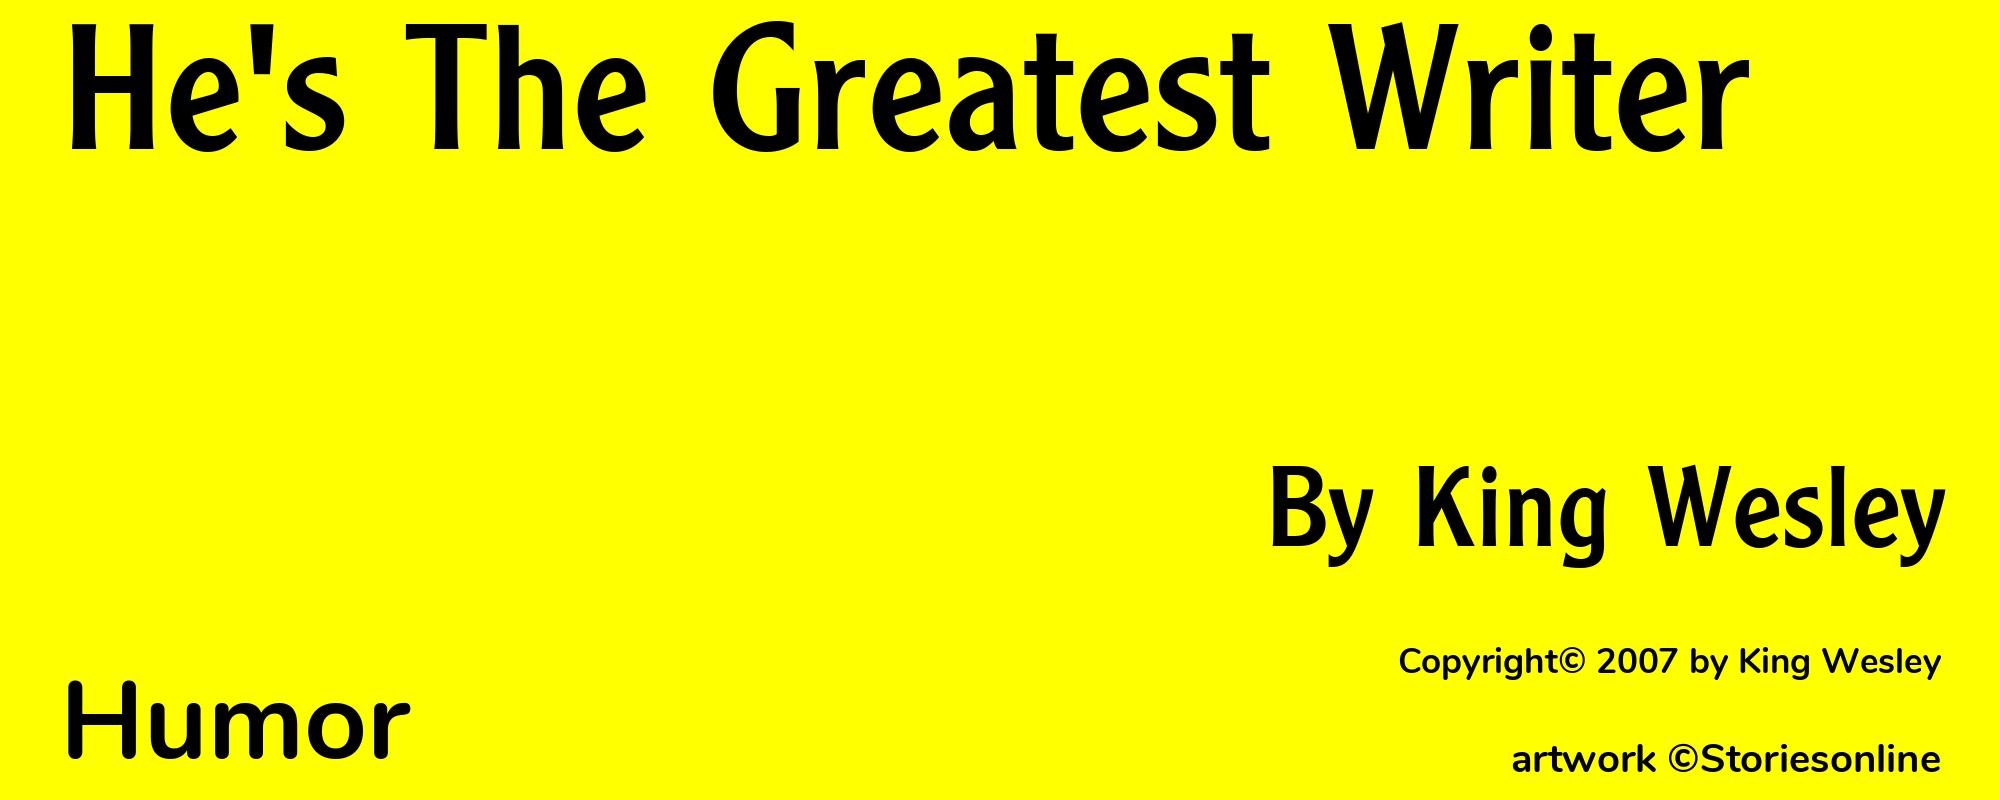 He's The Greatest Writer - Cover